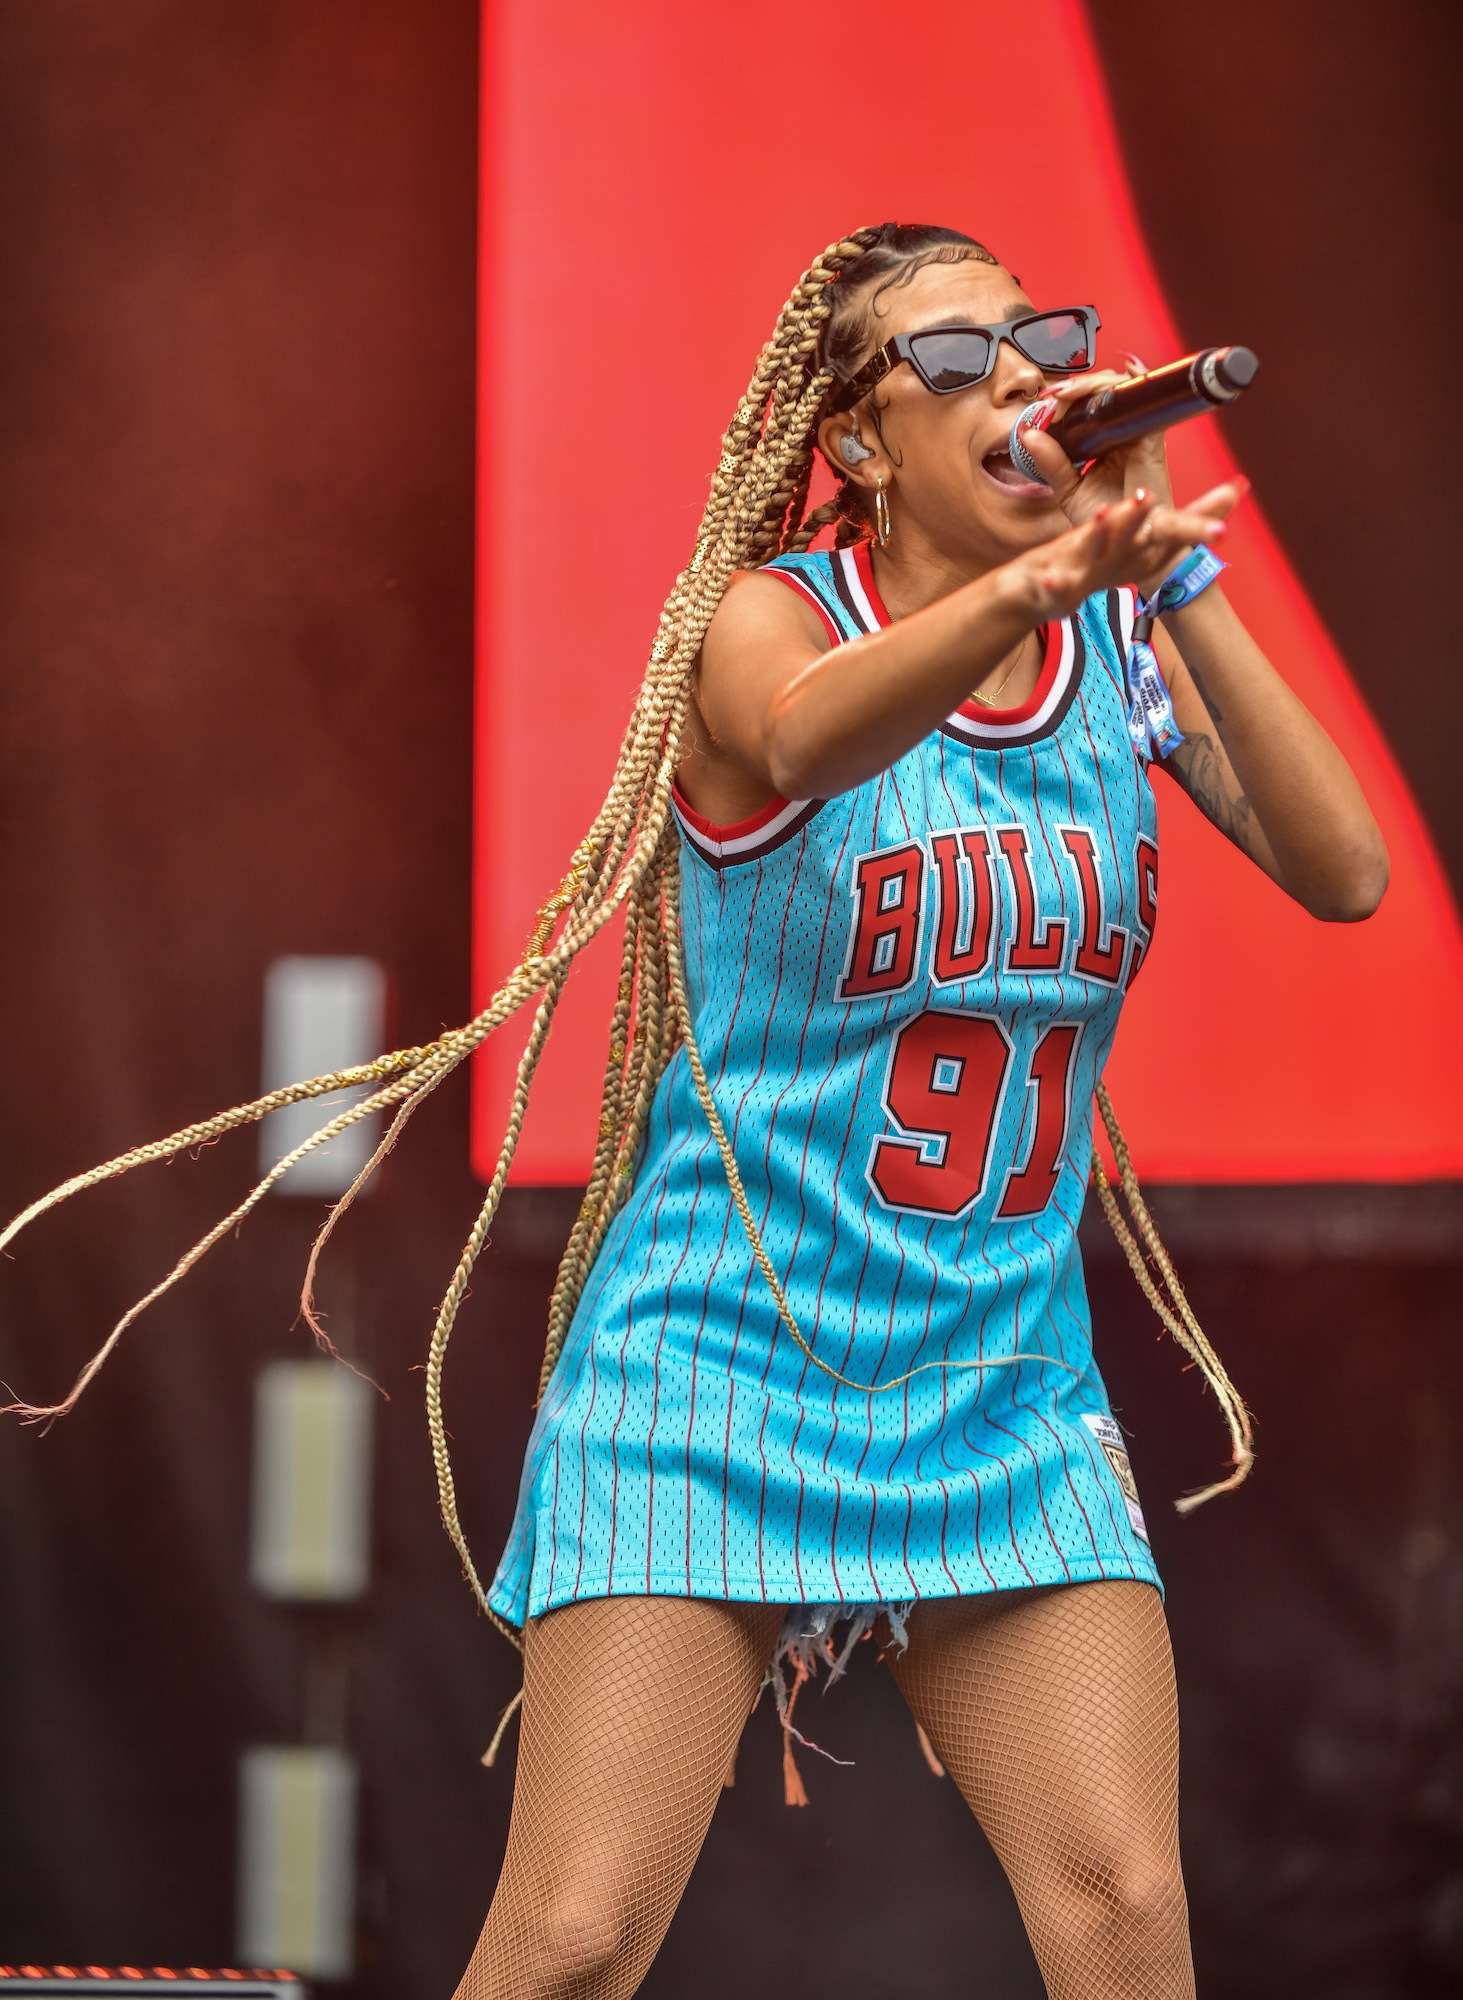 Emotional Oranges Live at Lollapalooza [GALLERY] 7